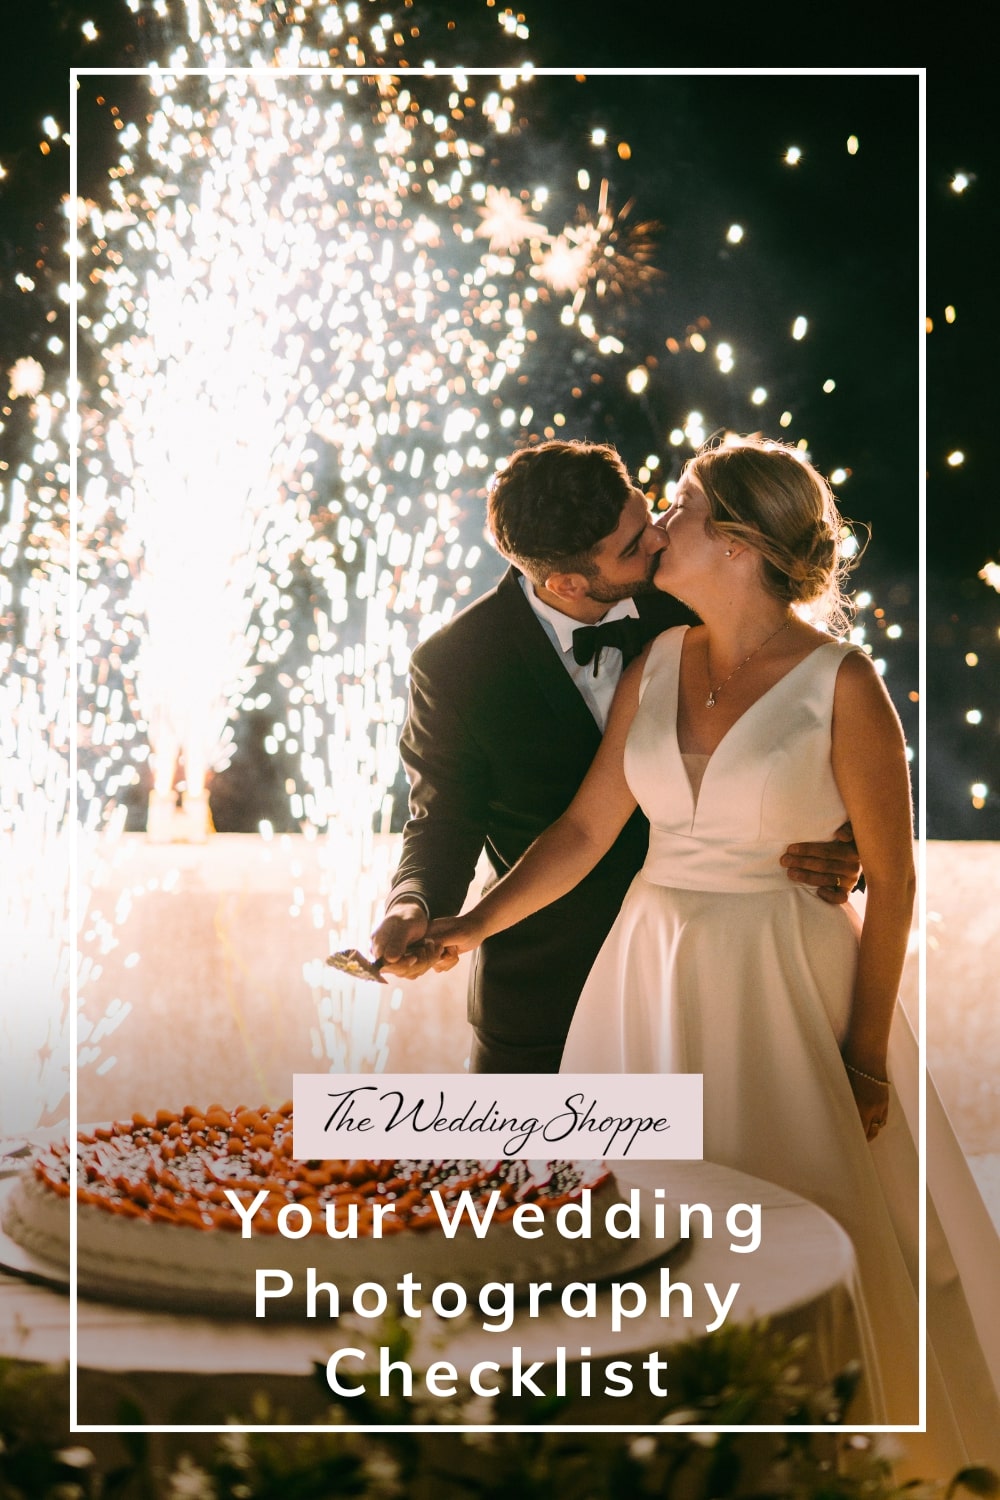 pinnable graphic for "Your Wedding Photography Checklist" from The Wedding Shoppe